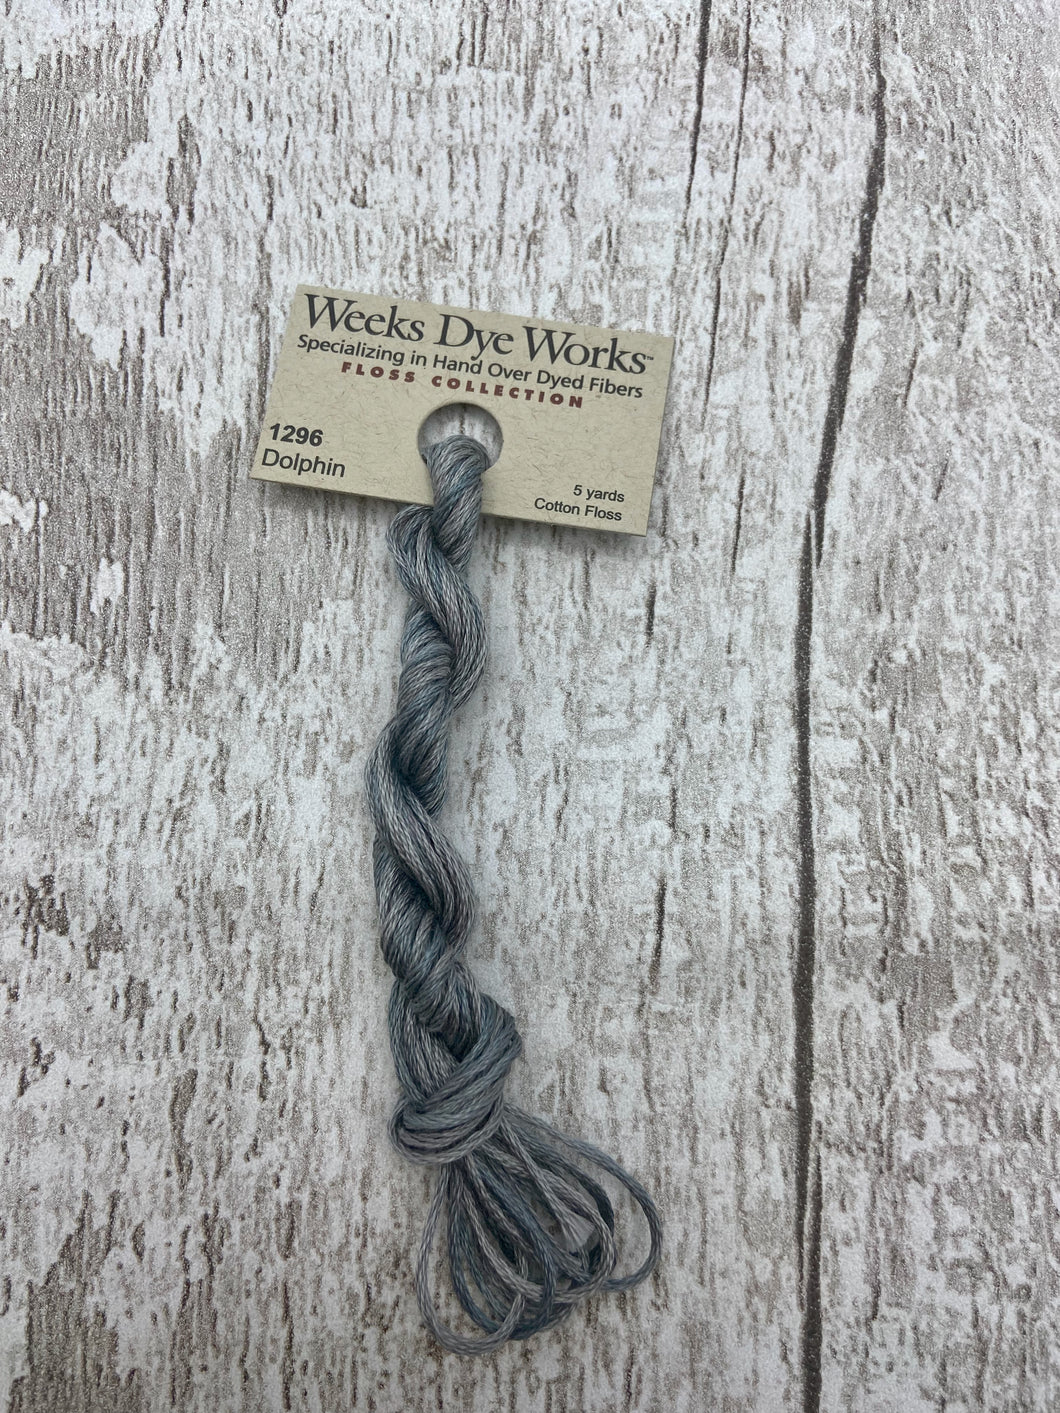 Dolphin (#1296) Weeks Dye Works, 6-strand cotton floss